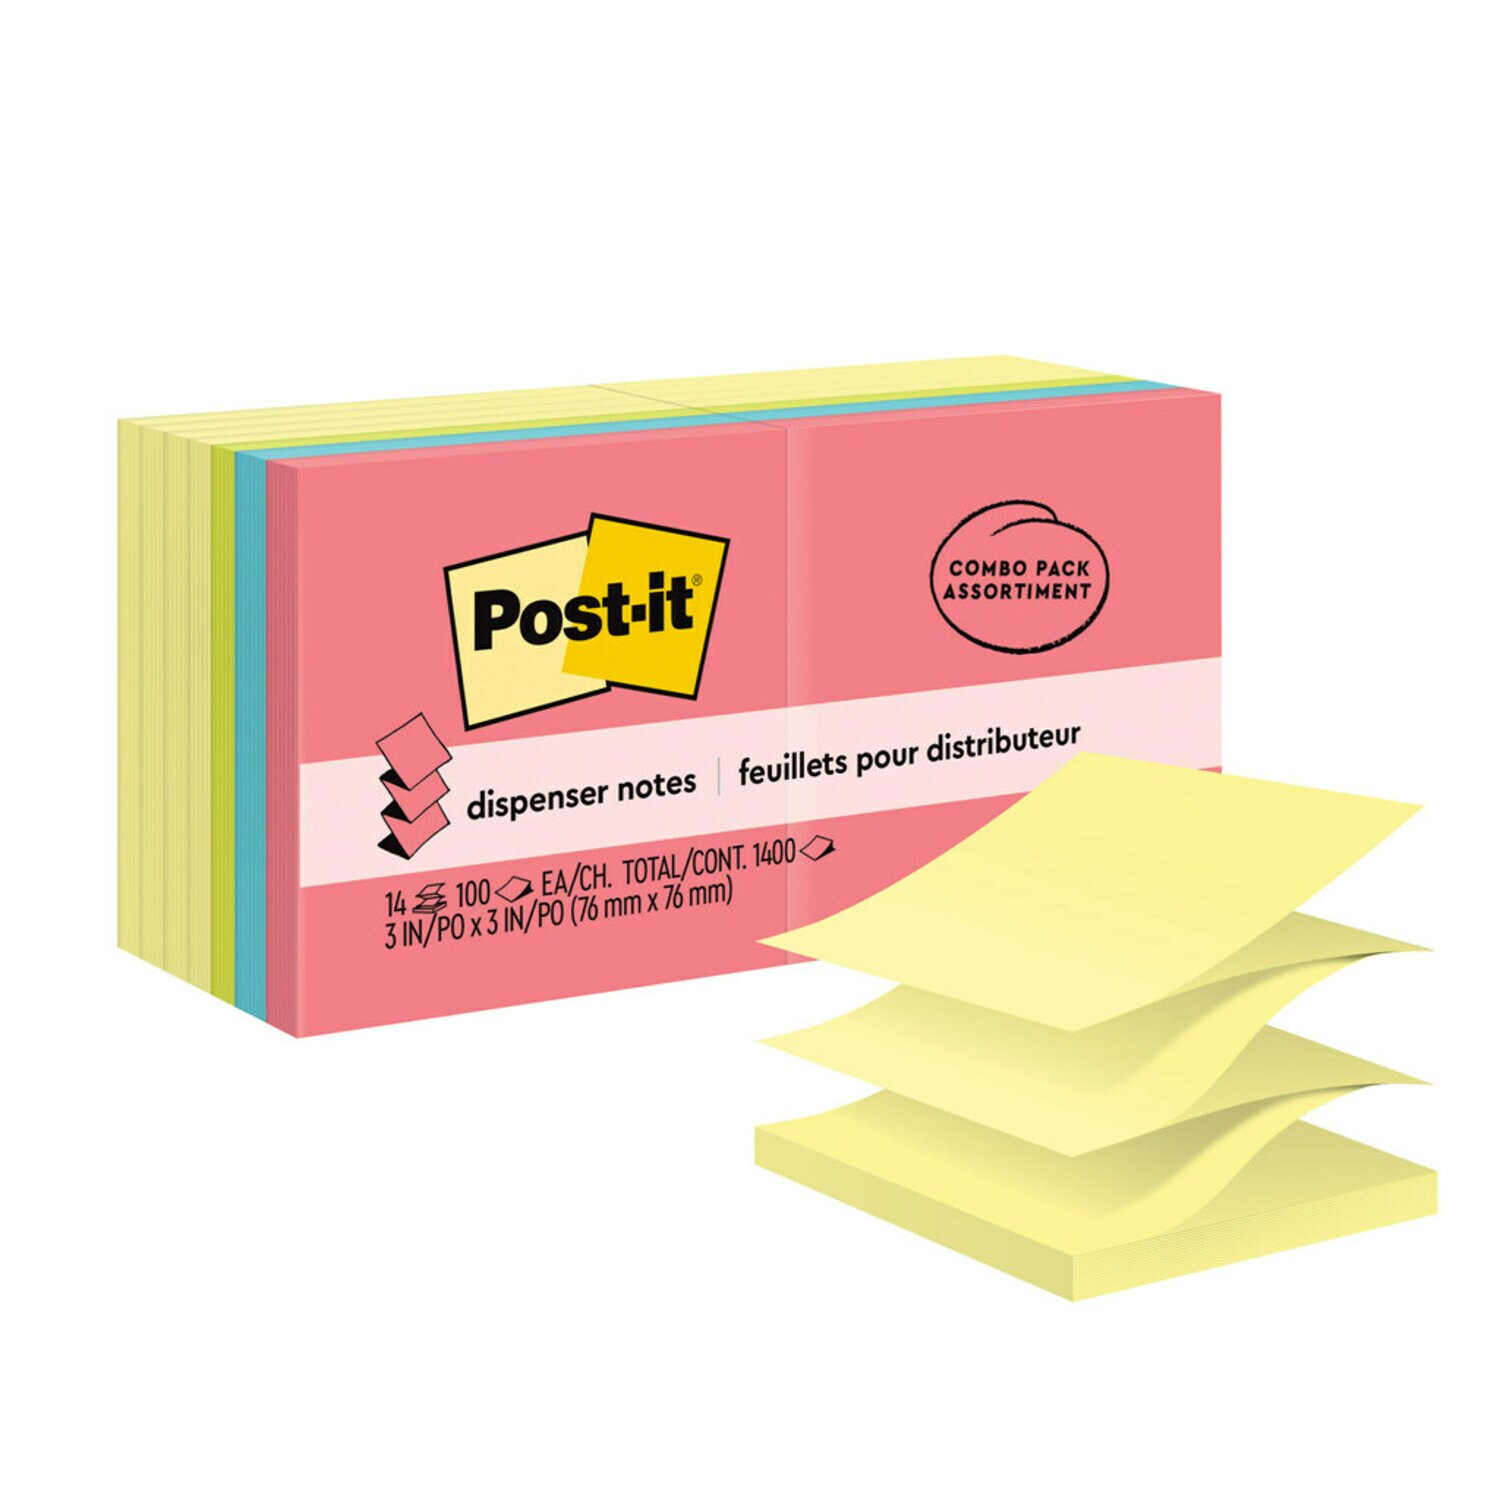 7010370991 - Post-it Dispenser Pop-up Notes R330-14YWM, 3 in x 3 in, Canary Yellow, Poptimistic Collection